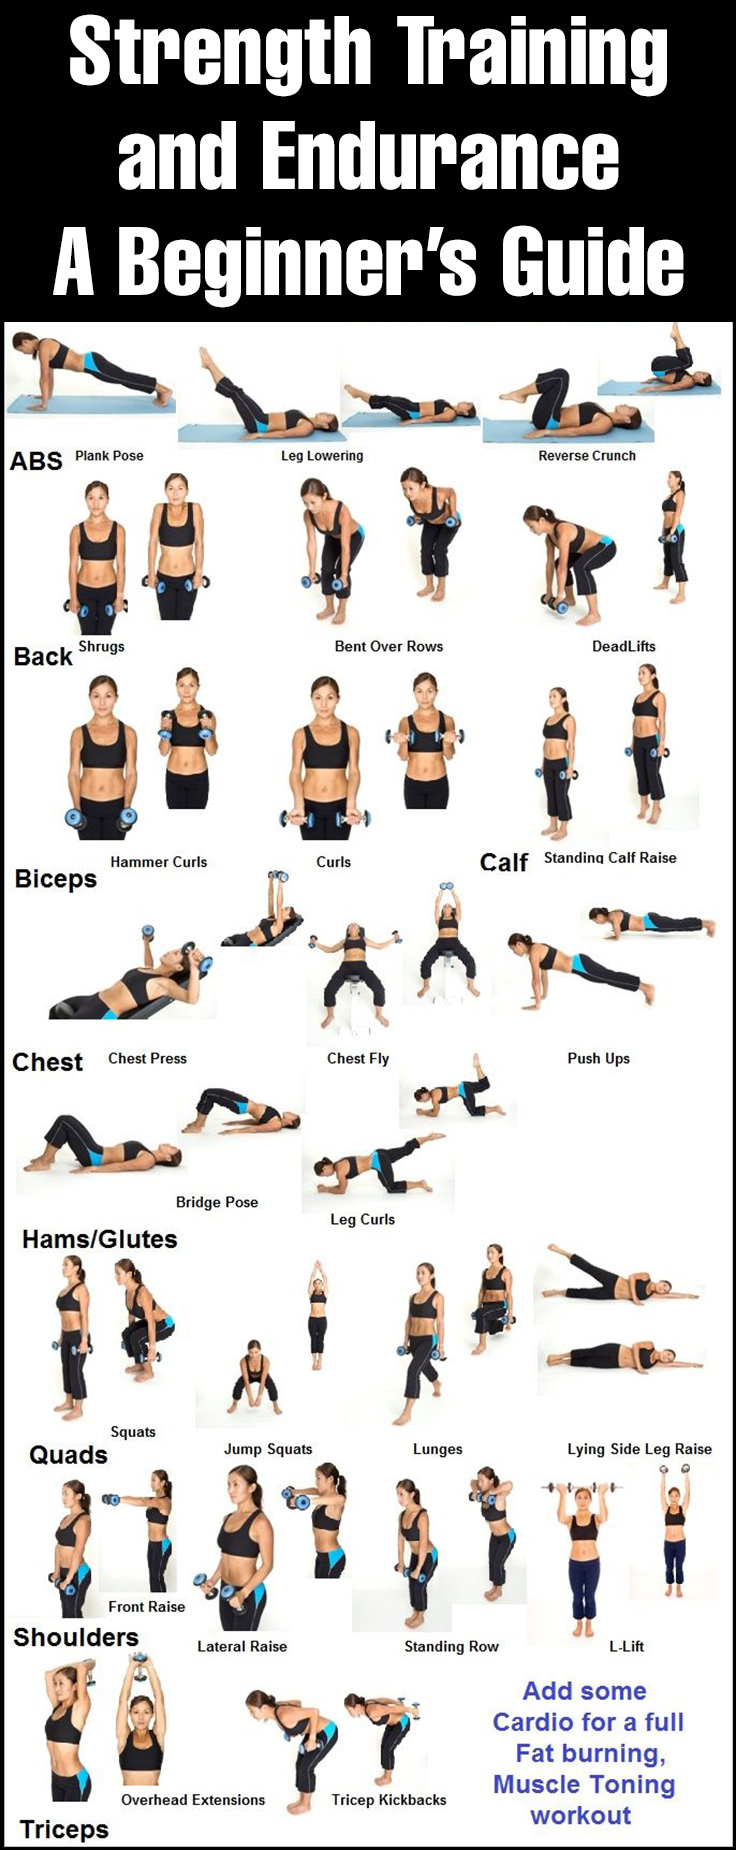 strength-training-and-endurance-a-beginner-s-guide